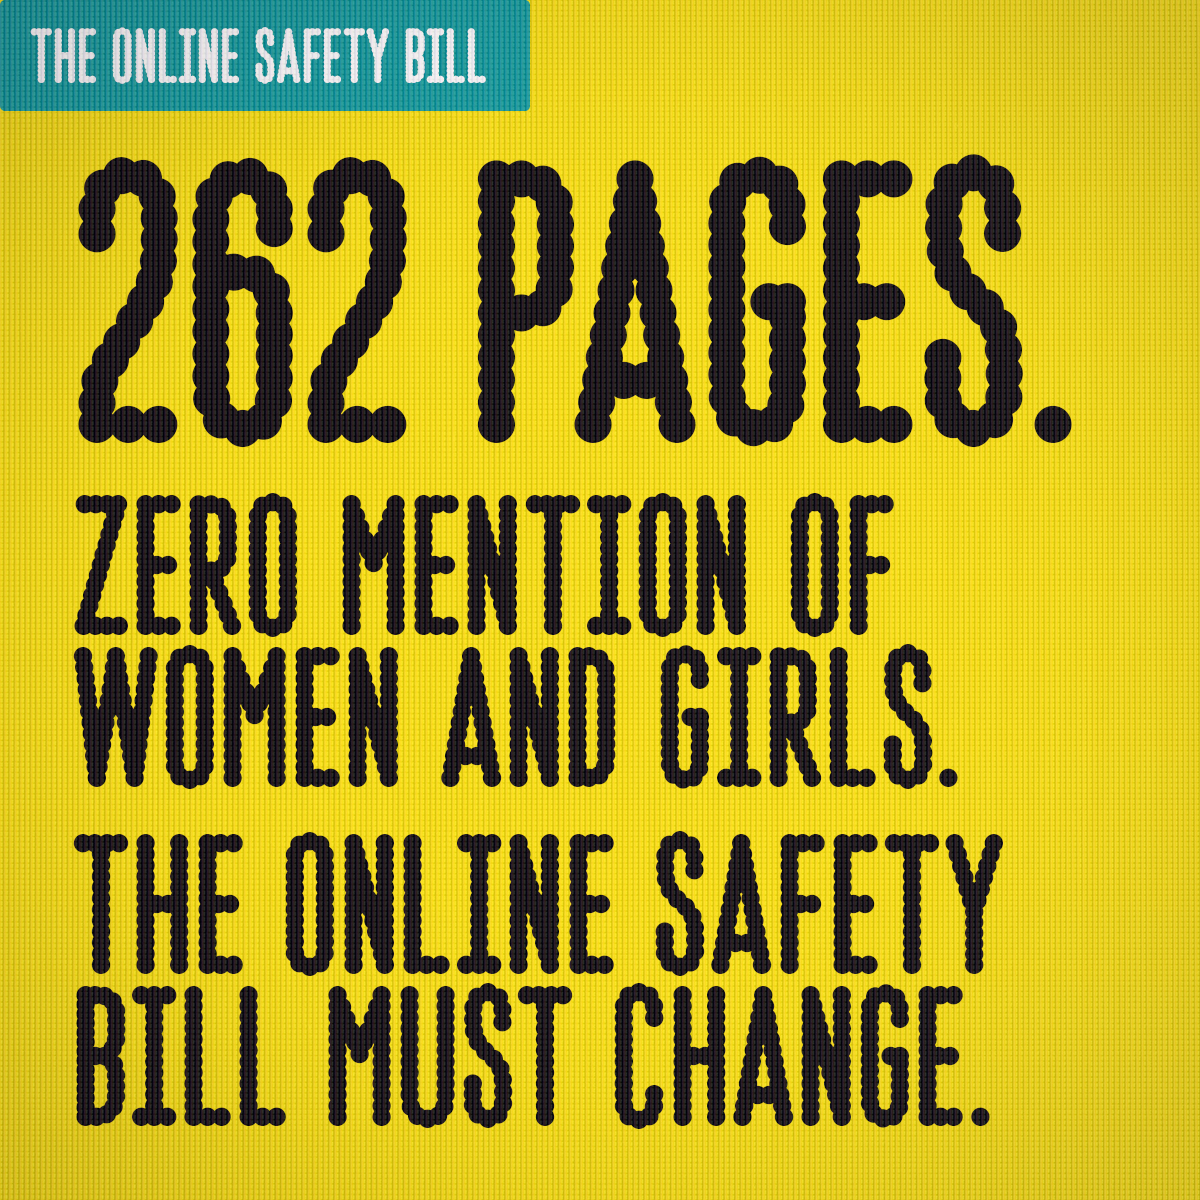 The #OnlineSafetyBill was designed to make the internet safer. But if women and girls are to be protected from abuse online, it must be amended! Let's #MakeItSafer for women and girls online. Visit ee.co.uk/hopeunited to find out how.